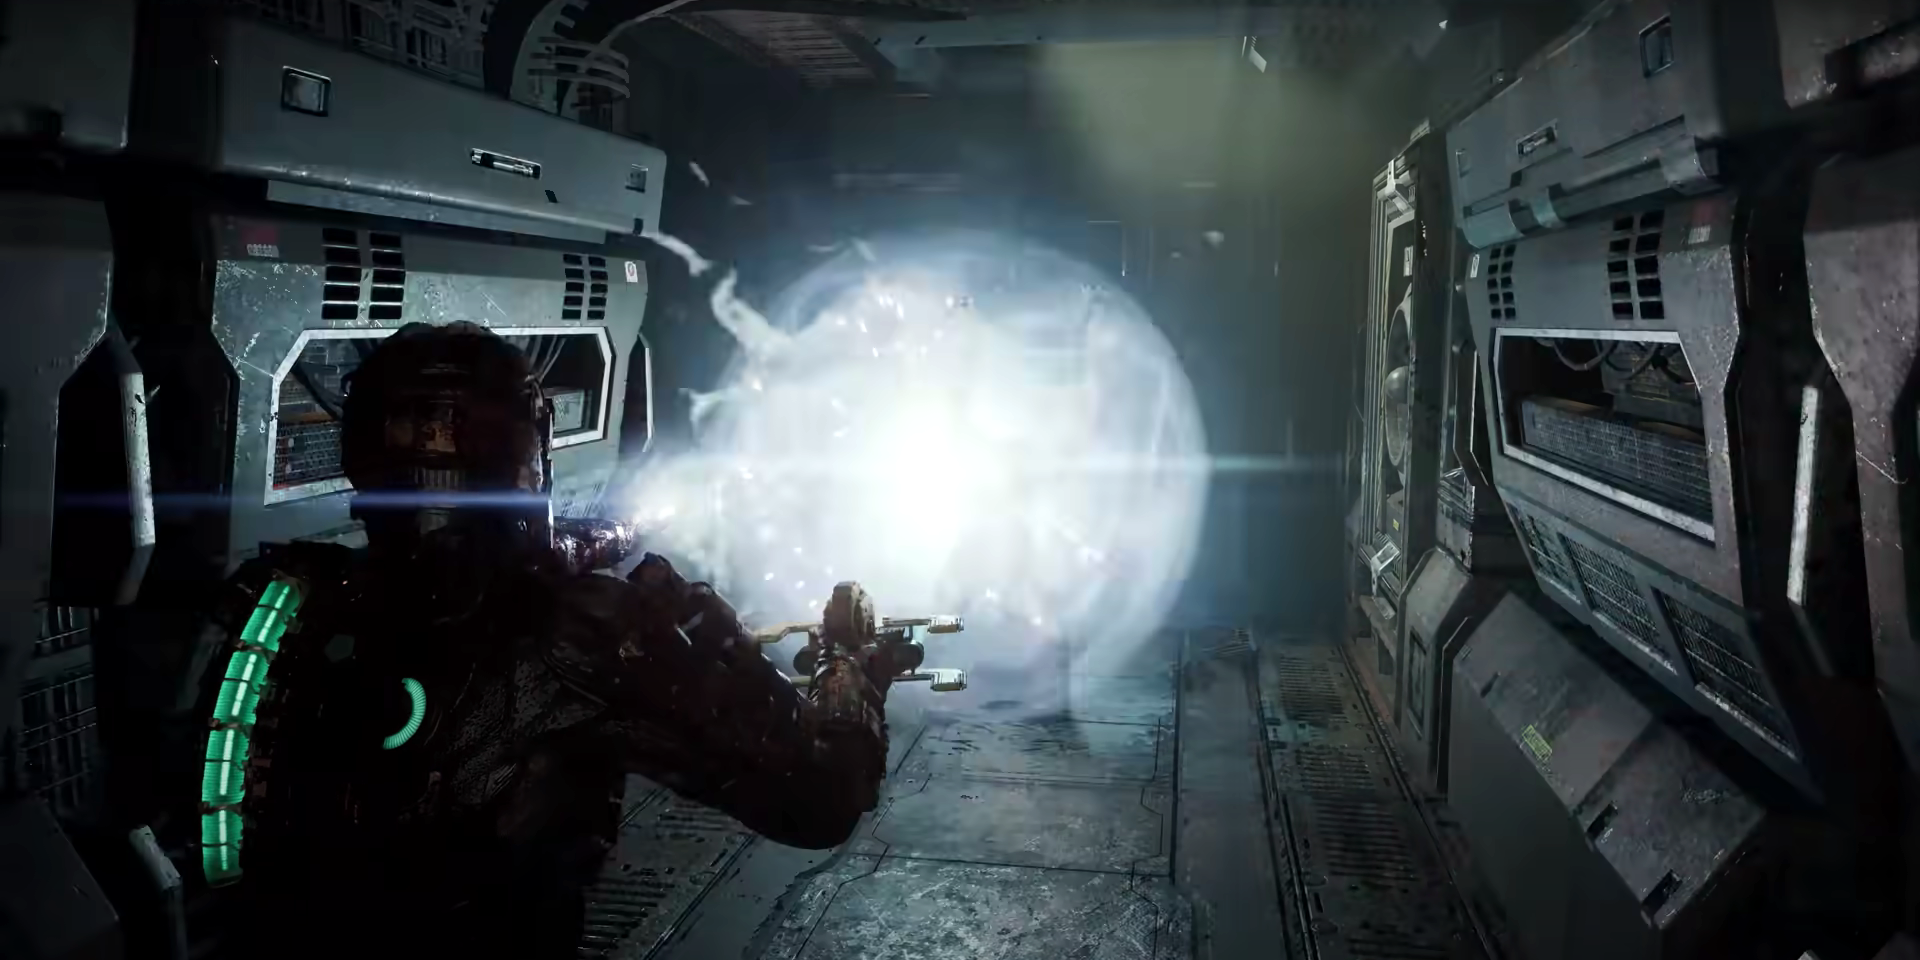 Weapons in use in the Dead Space Remake